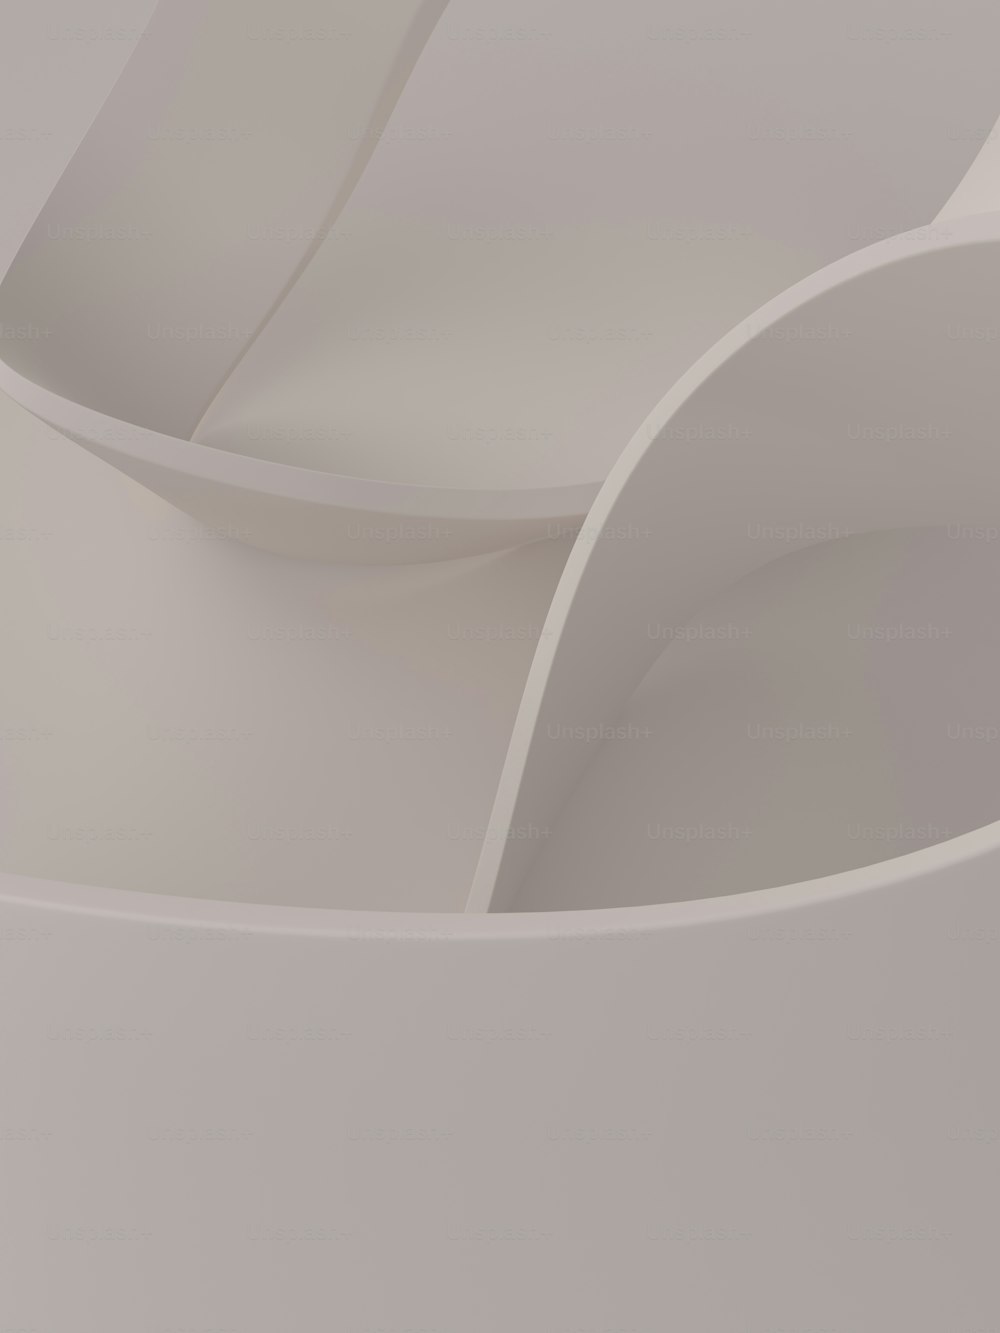 a close up of a white object with curved edges